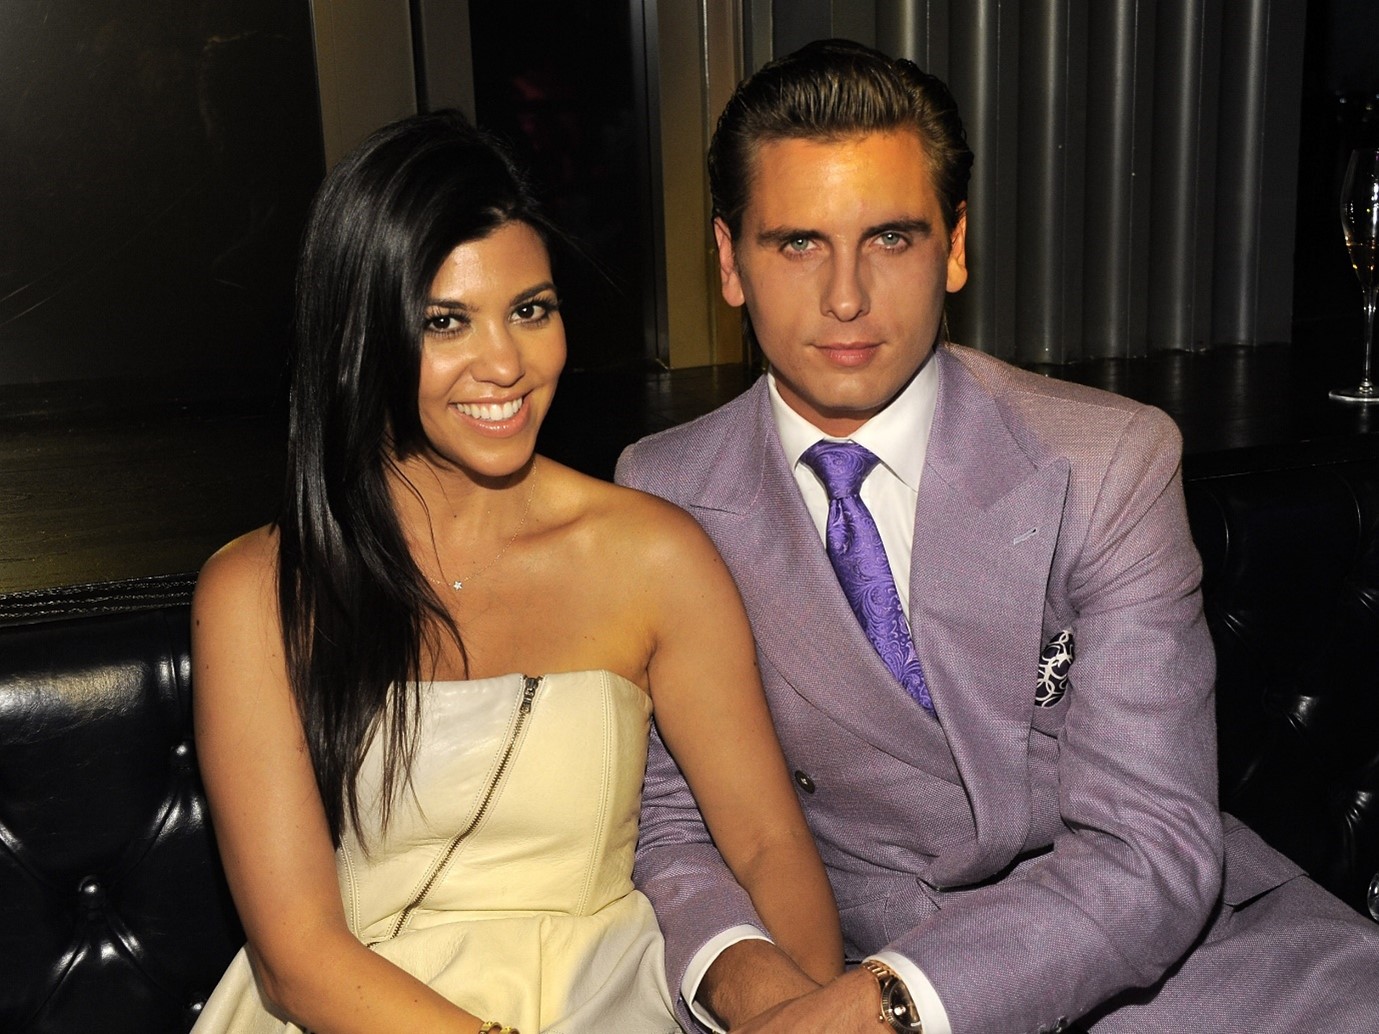 The reality star with her ex Scott Disick.